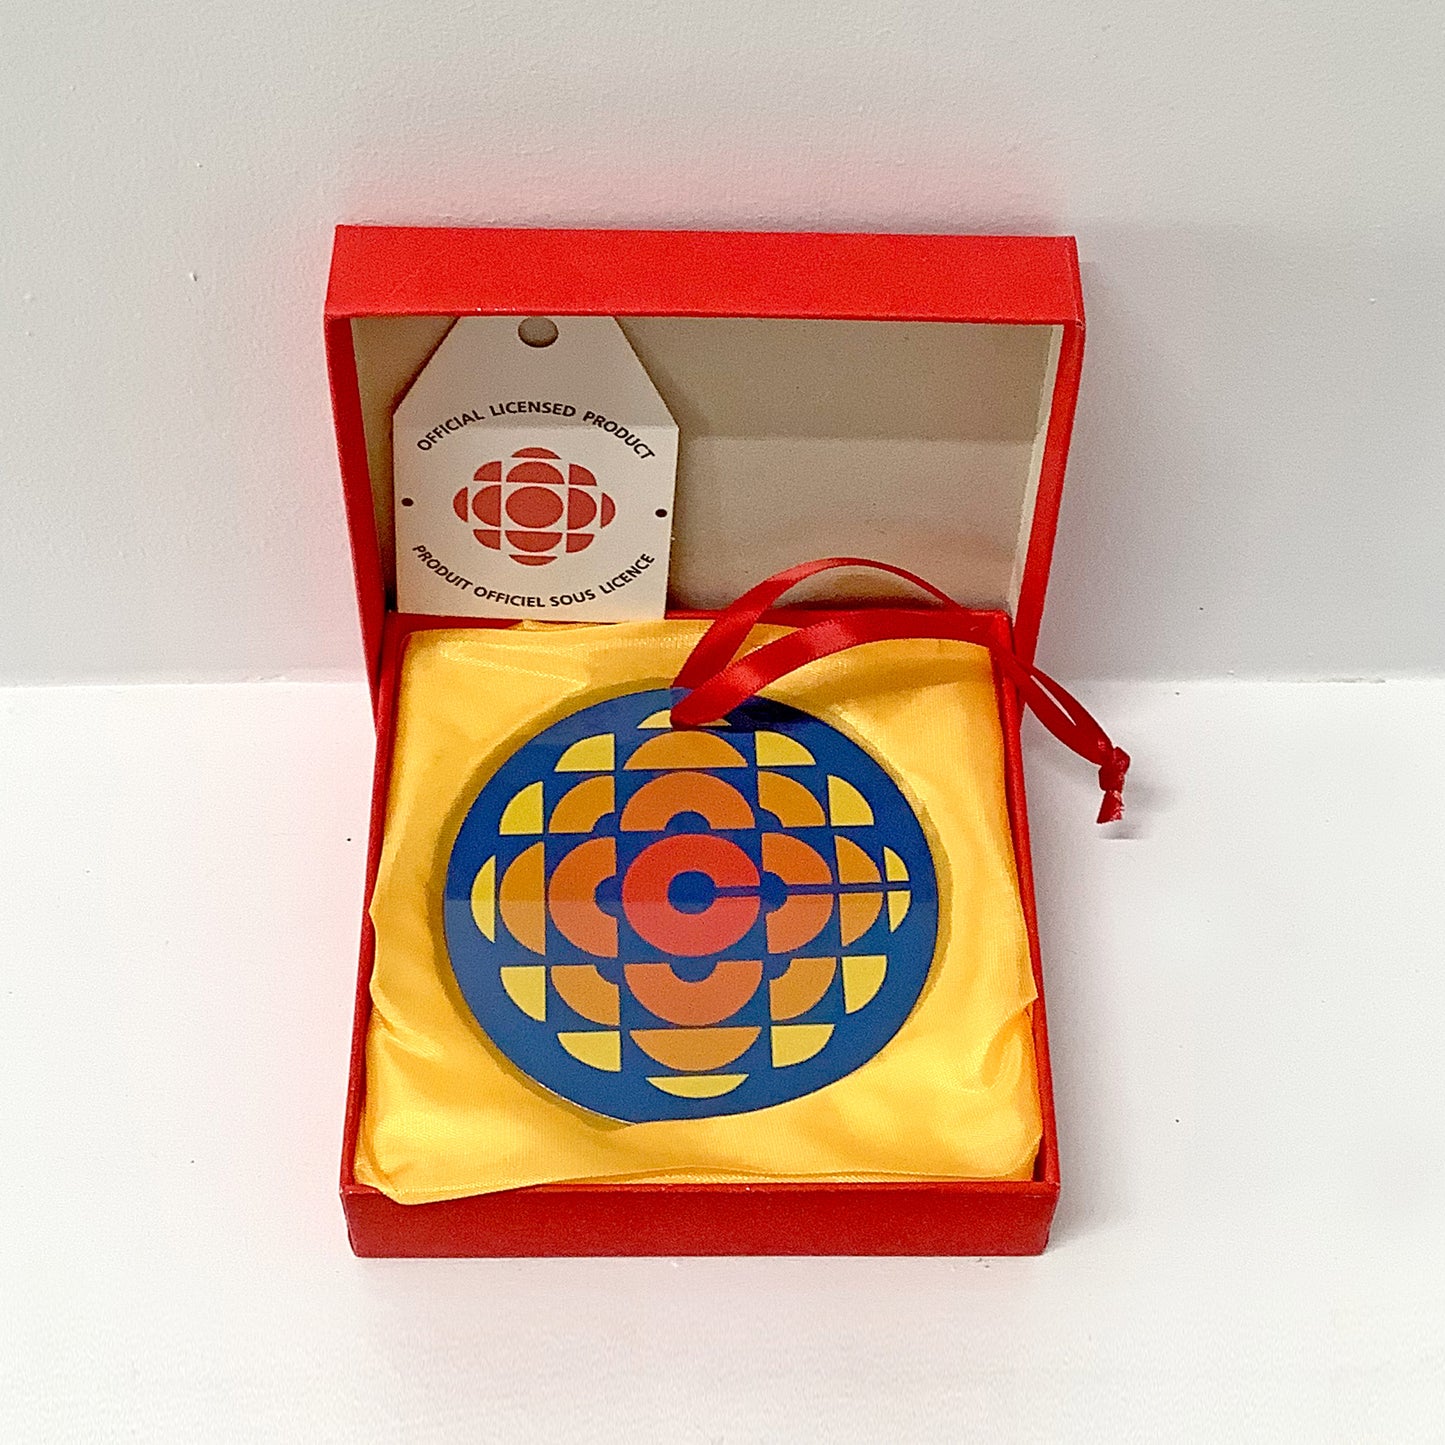 Personalized Aluminum Ornament Double Sided - CBC (1974-1986) [on Blue Background]